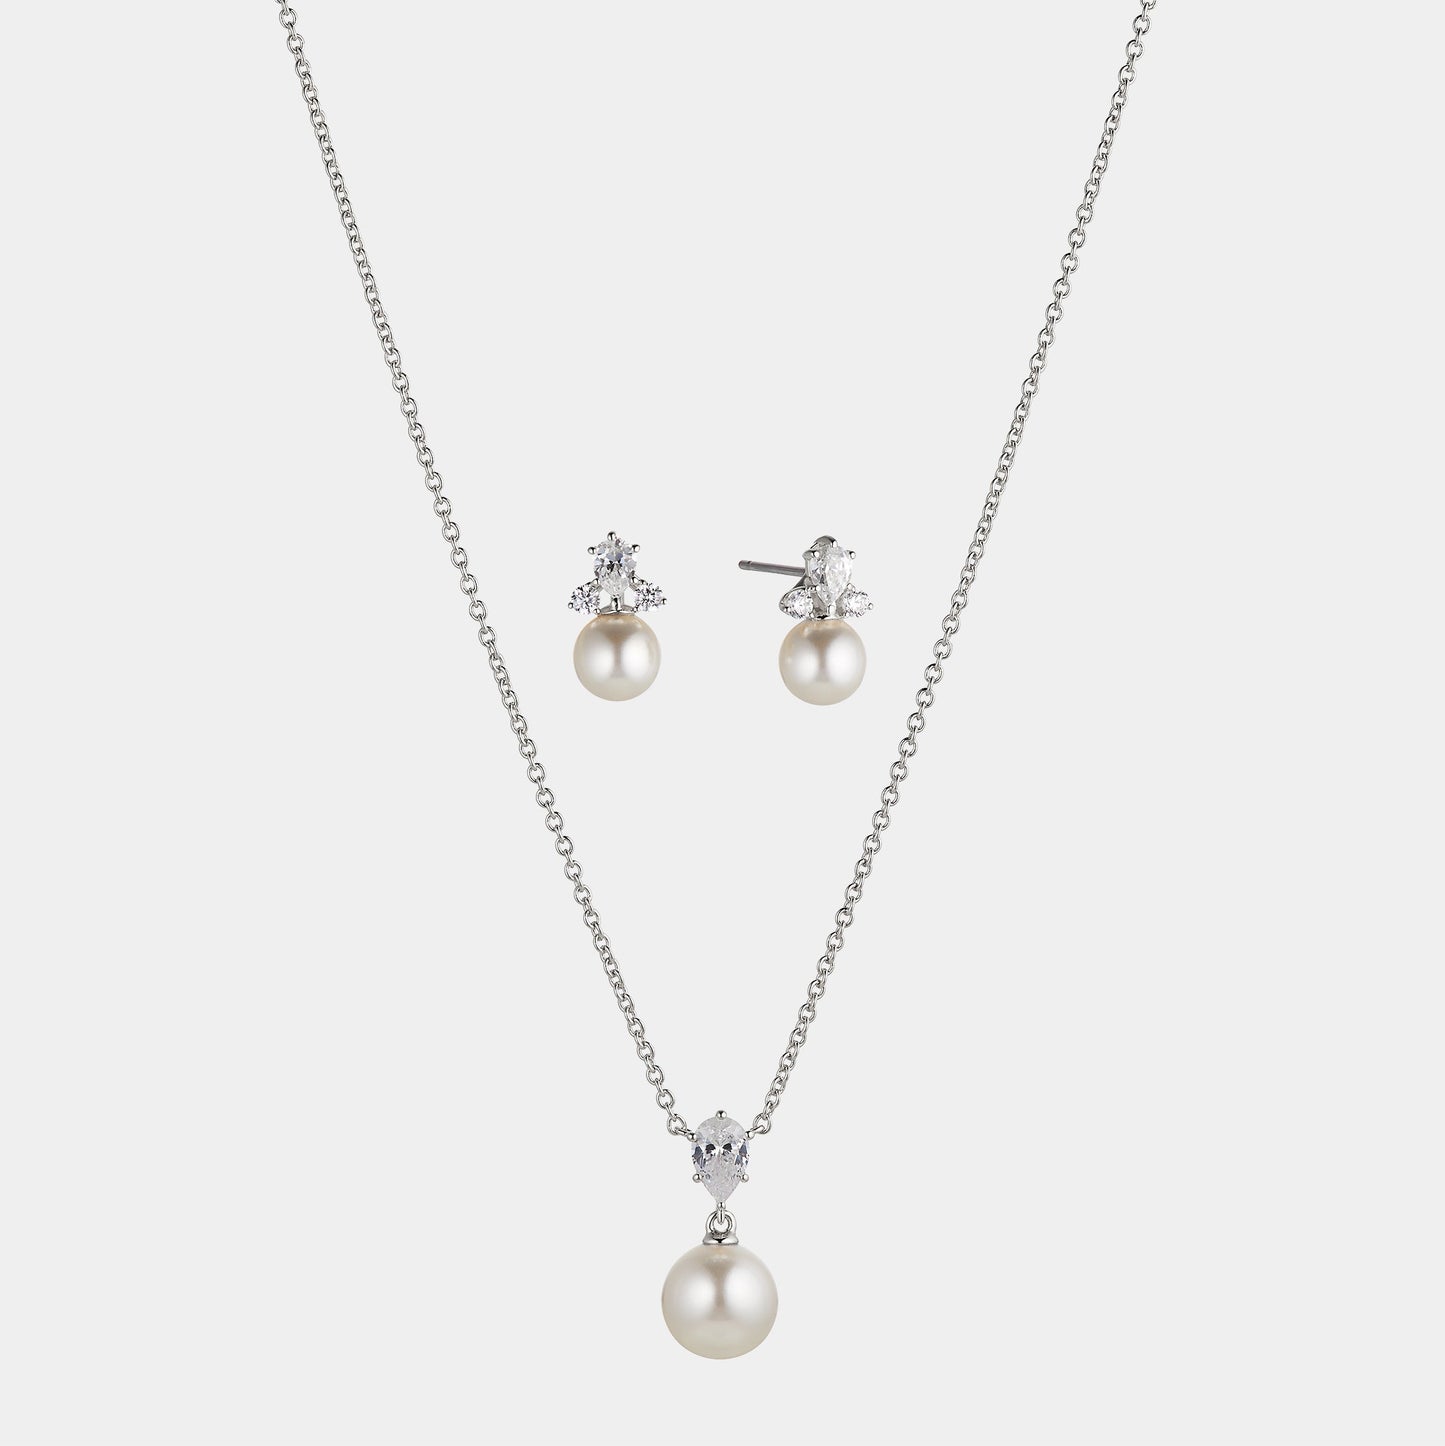 BRIDESMAIDS PEARL PENDANT AND EARRING SET